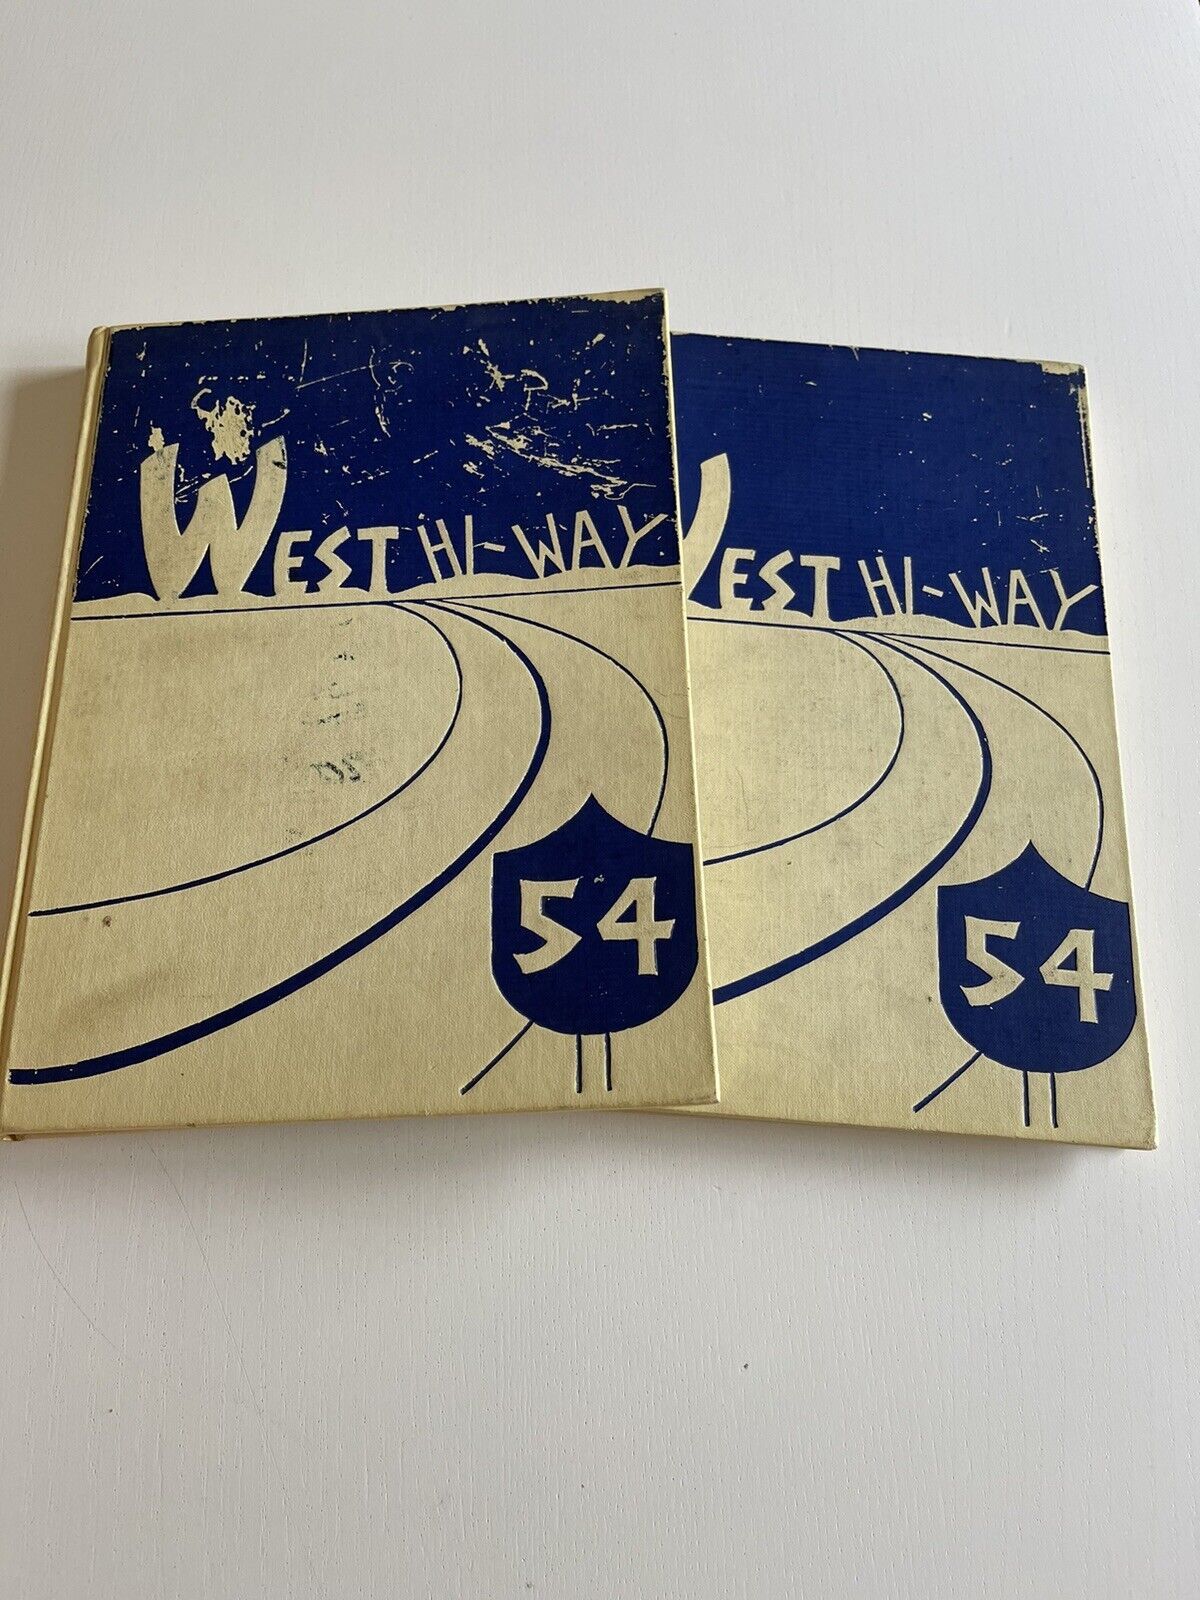 West High School Green Bay, Wisconsin Yearbook 1954 x2 with Messages/writing